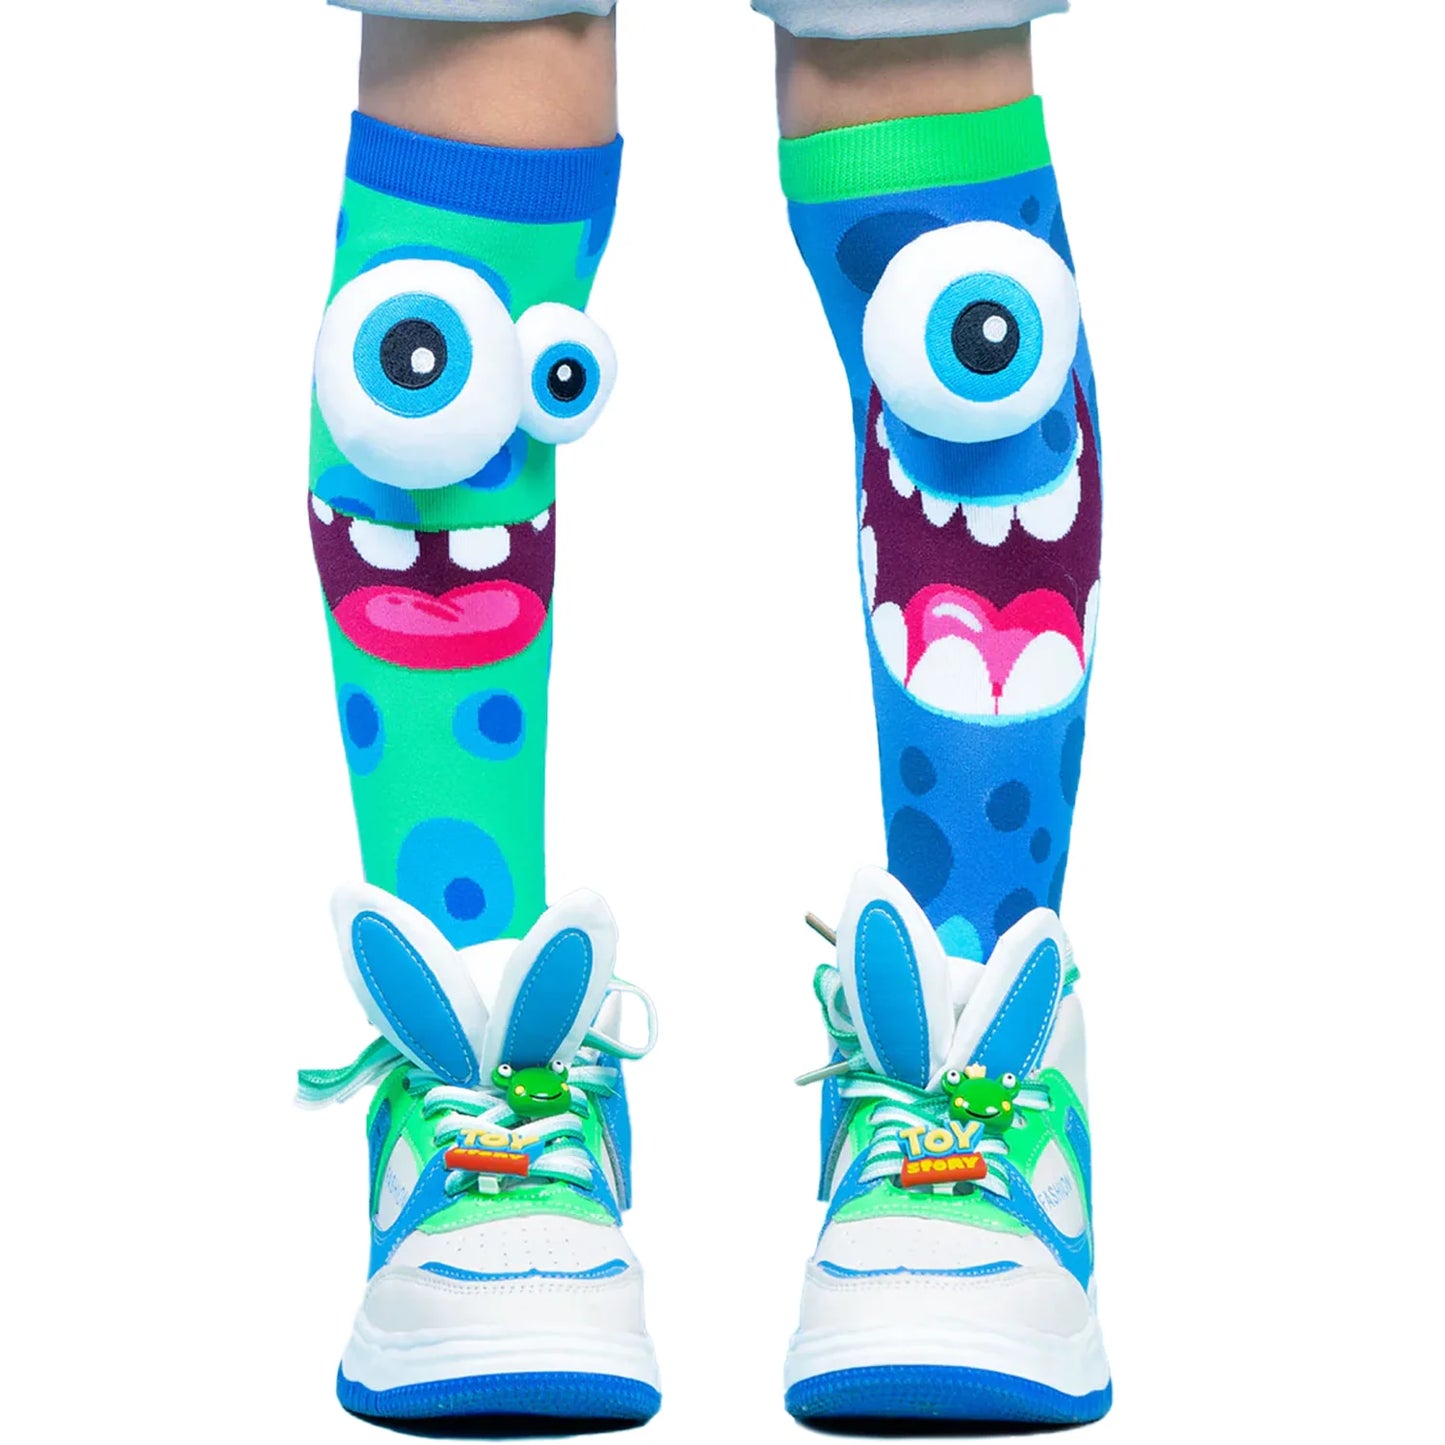 MADMIA - Silly Monsters Socks